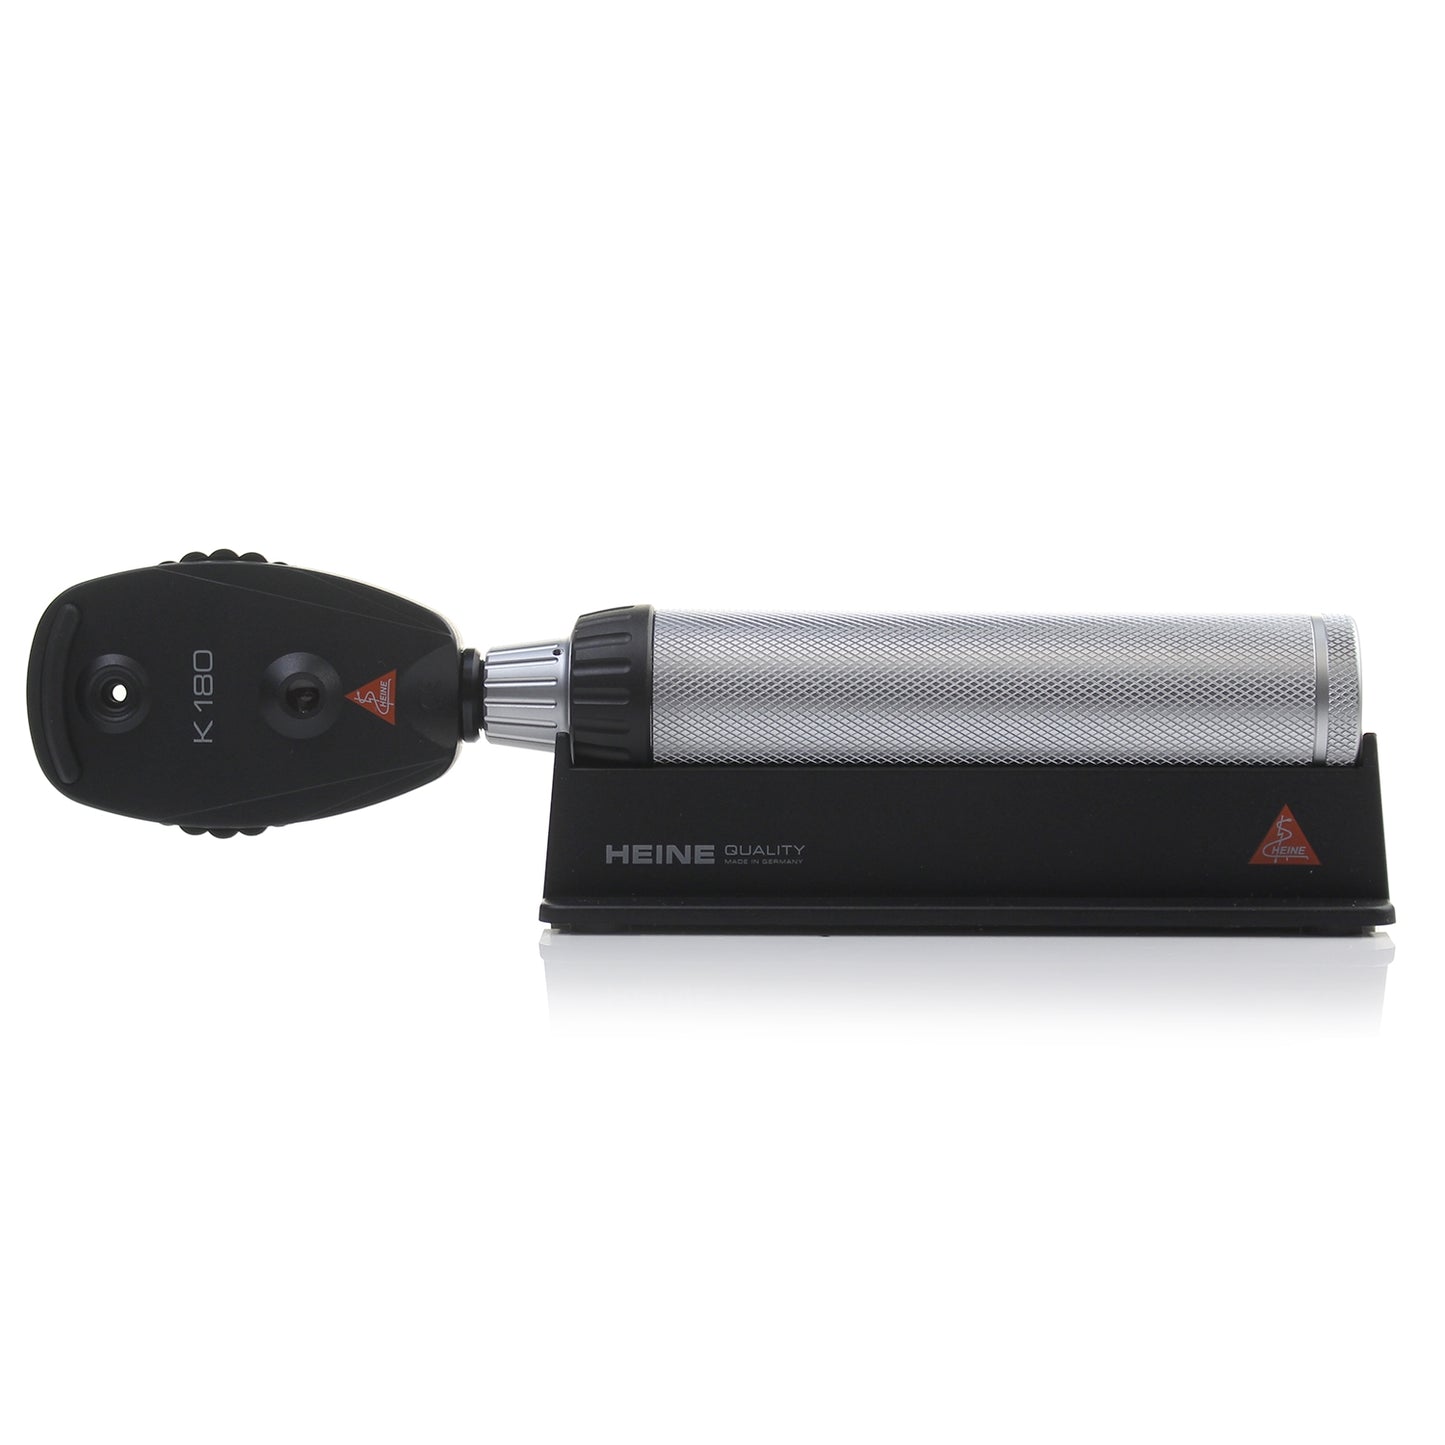 HEINE K180 Opthalmoscope with USB Handle & Charger 3.5v